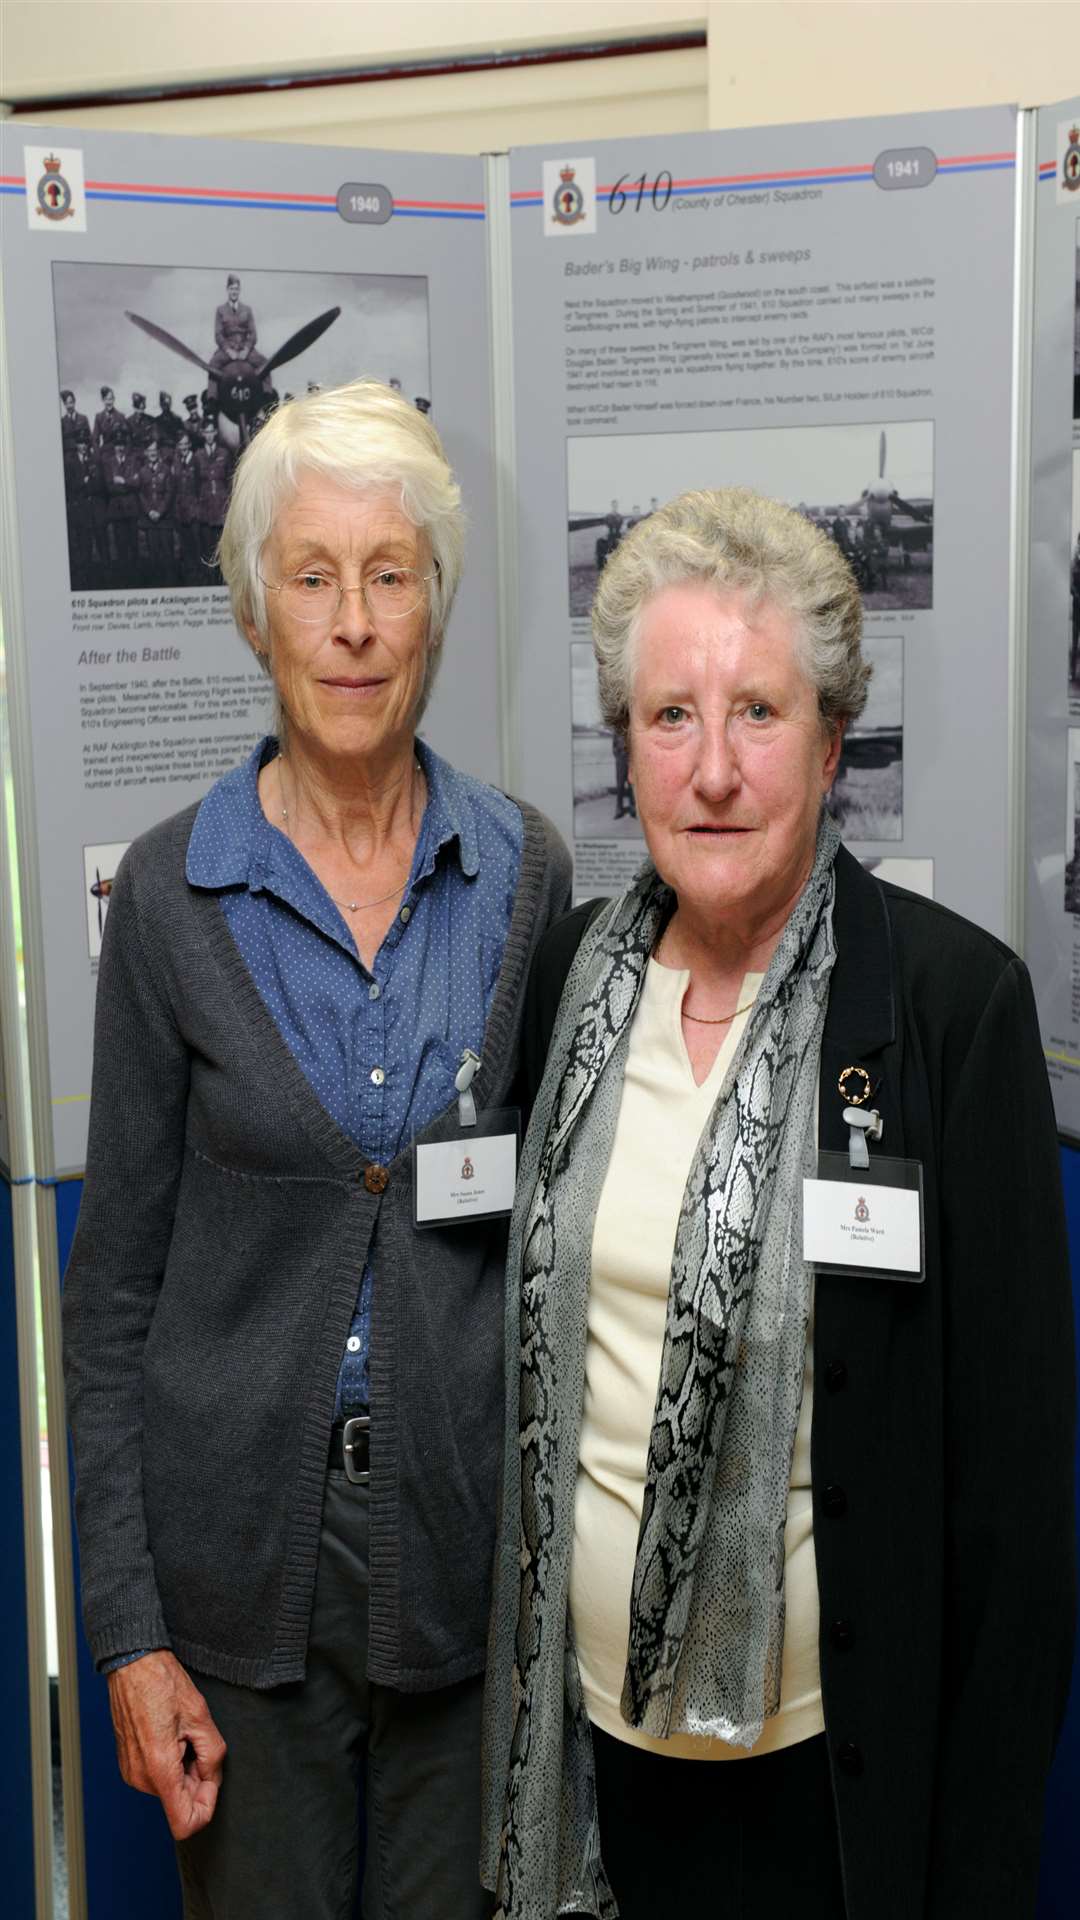 Sisters, Sue Jones & Pam Ward, their Uncle was Albert Medcalf was in the 610 squadron